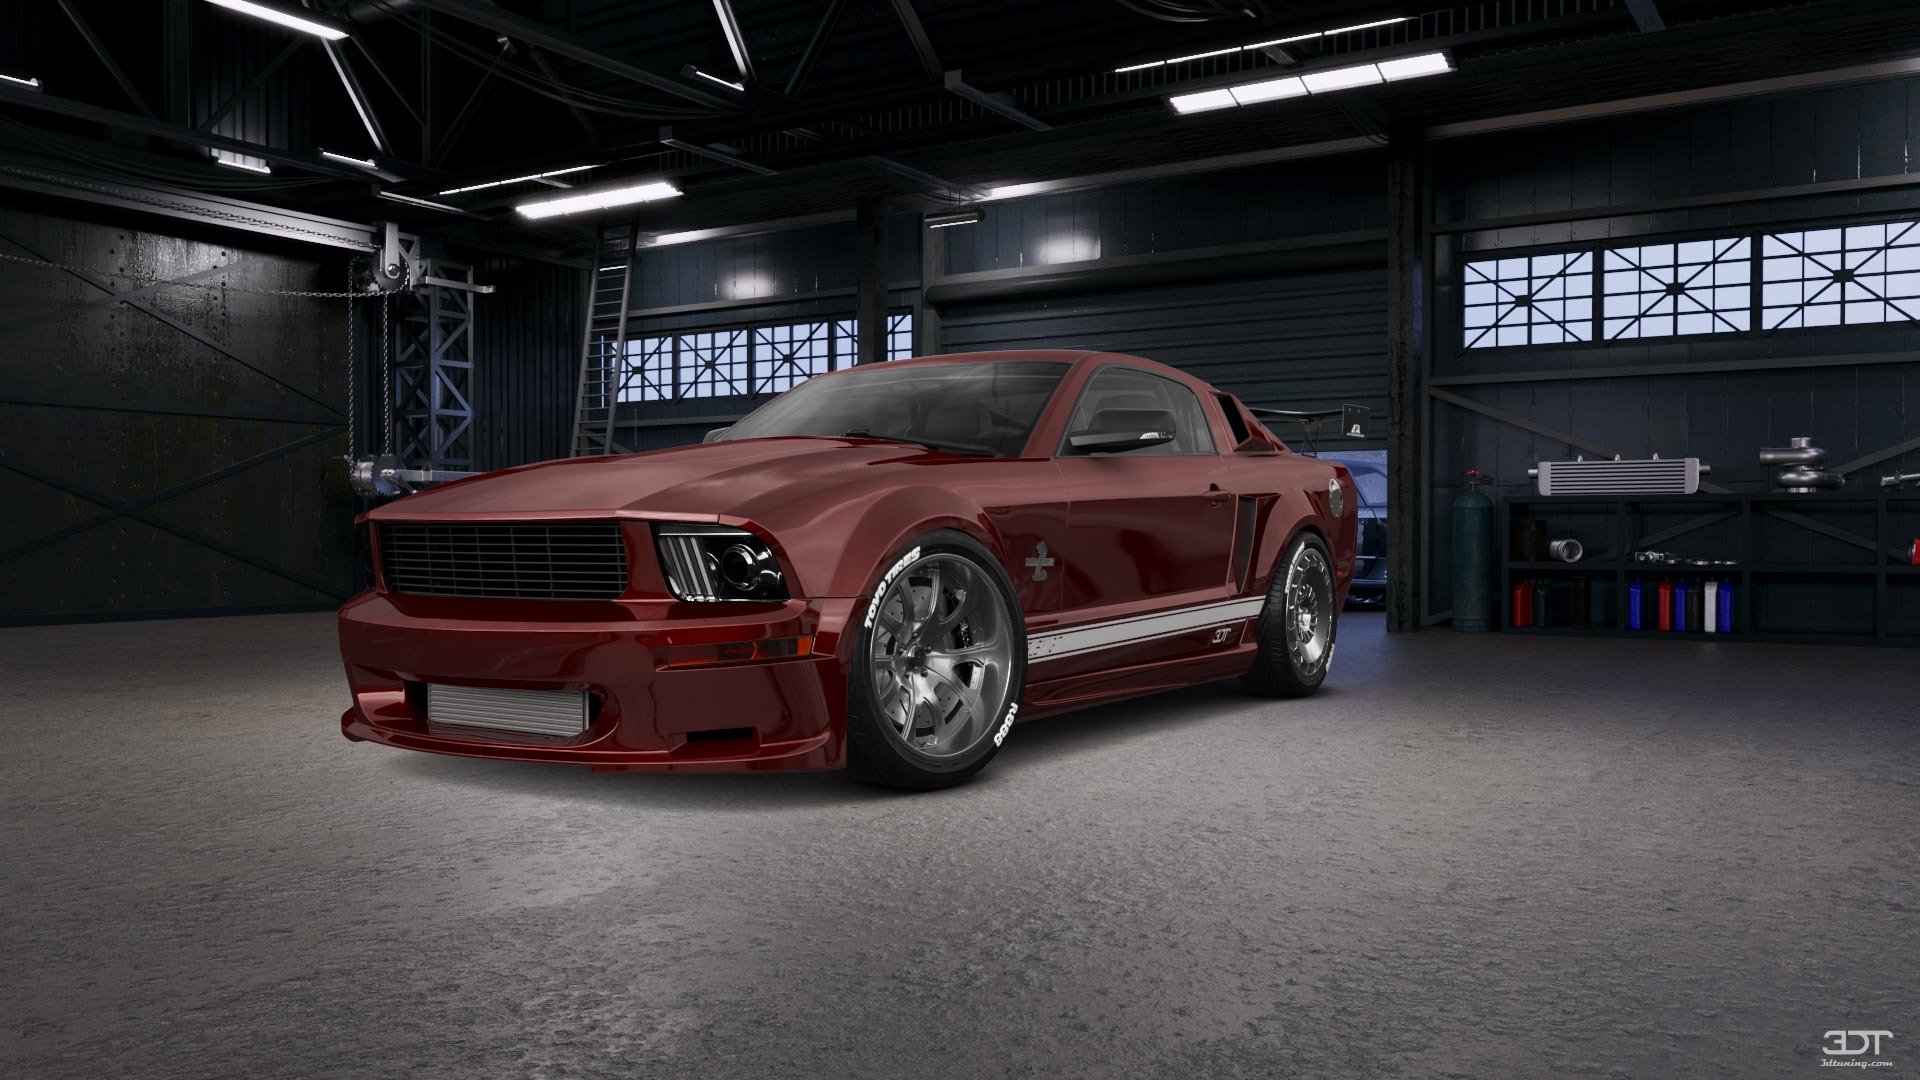 Ford Mustang 2 Door Coupe 2006